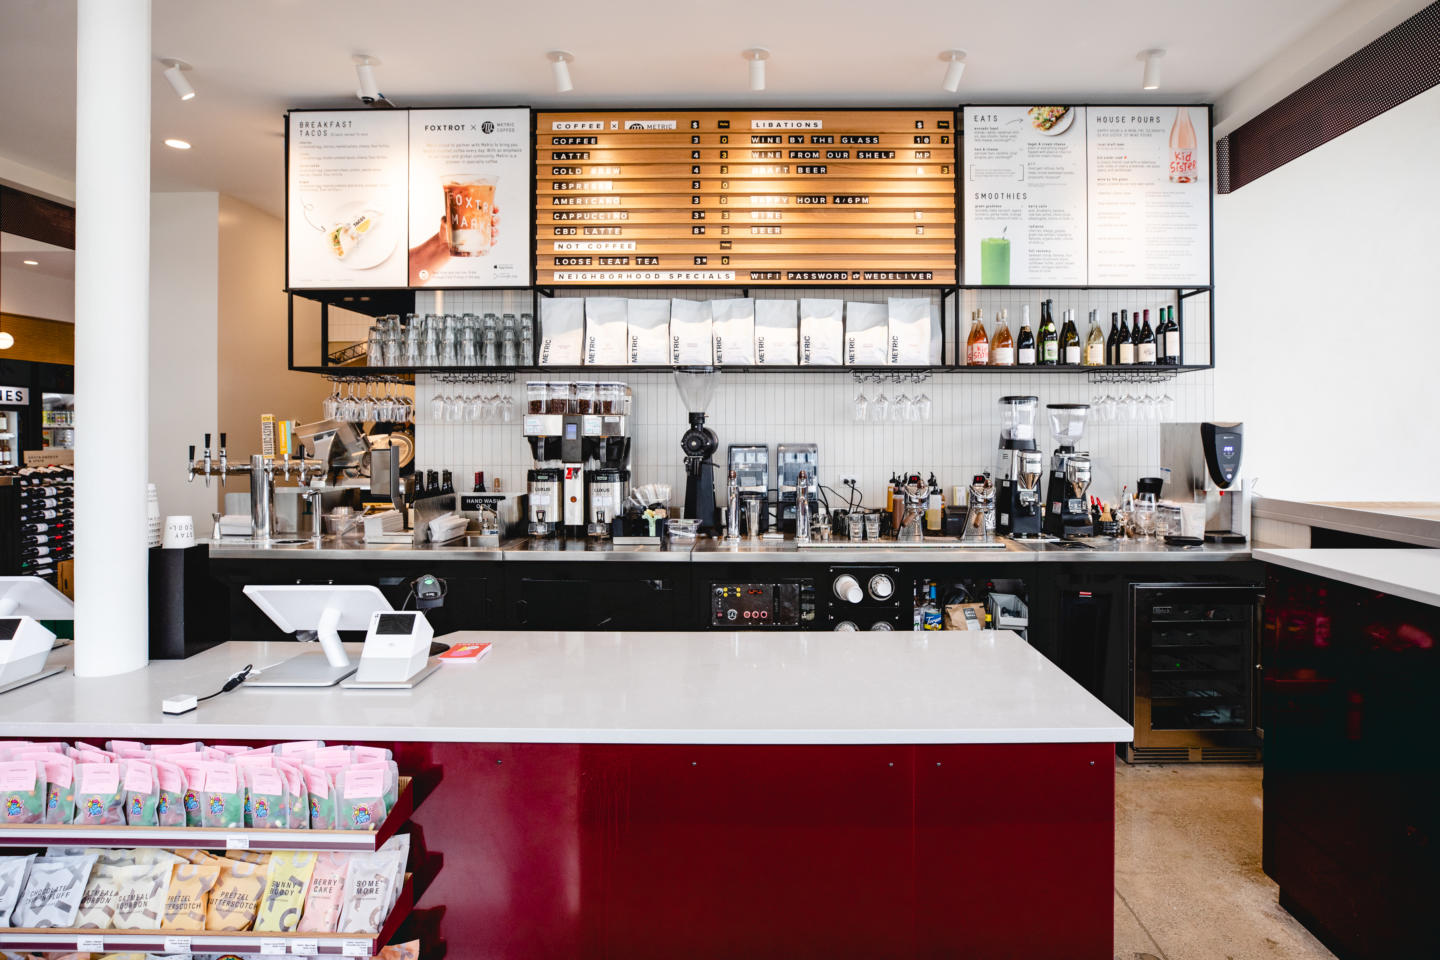 Cafe counter and point of sale area at Foxtrot Chicago